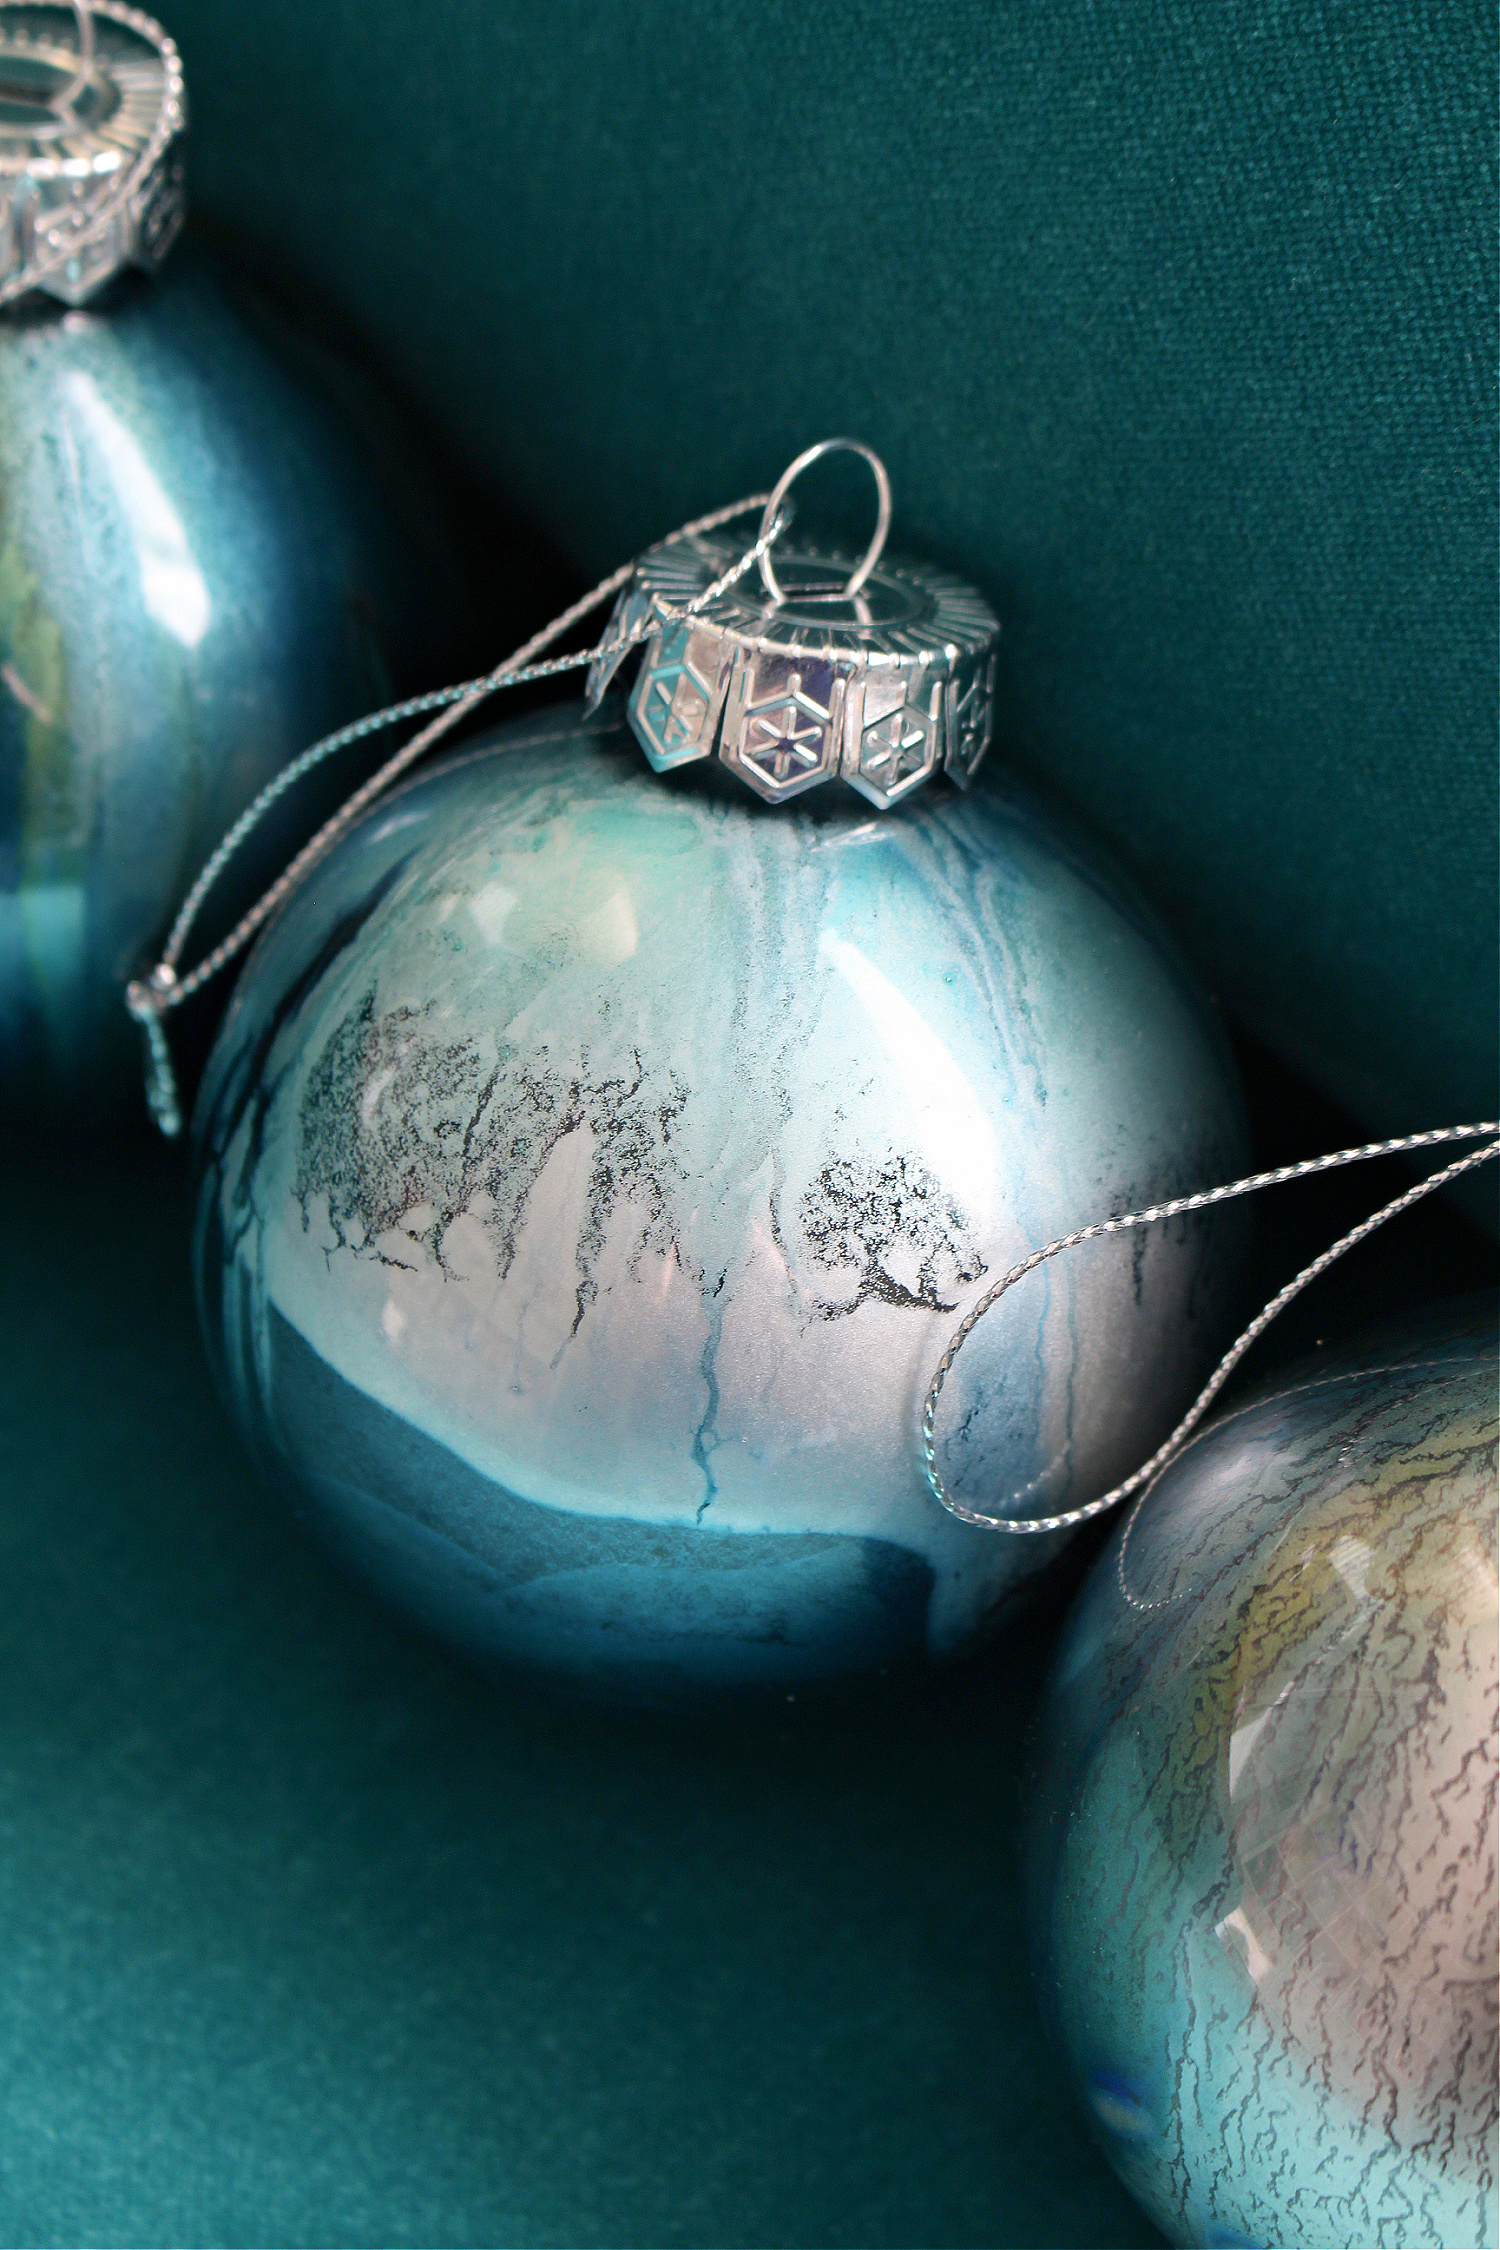 Can You Use Alcohol Ink on Plastic Ornaments? YES!